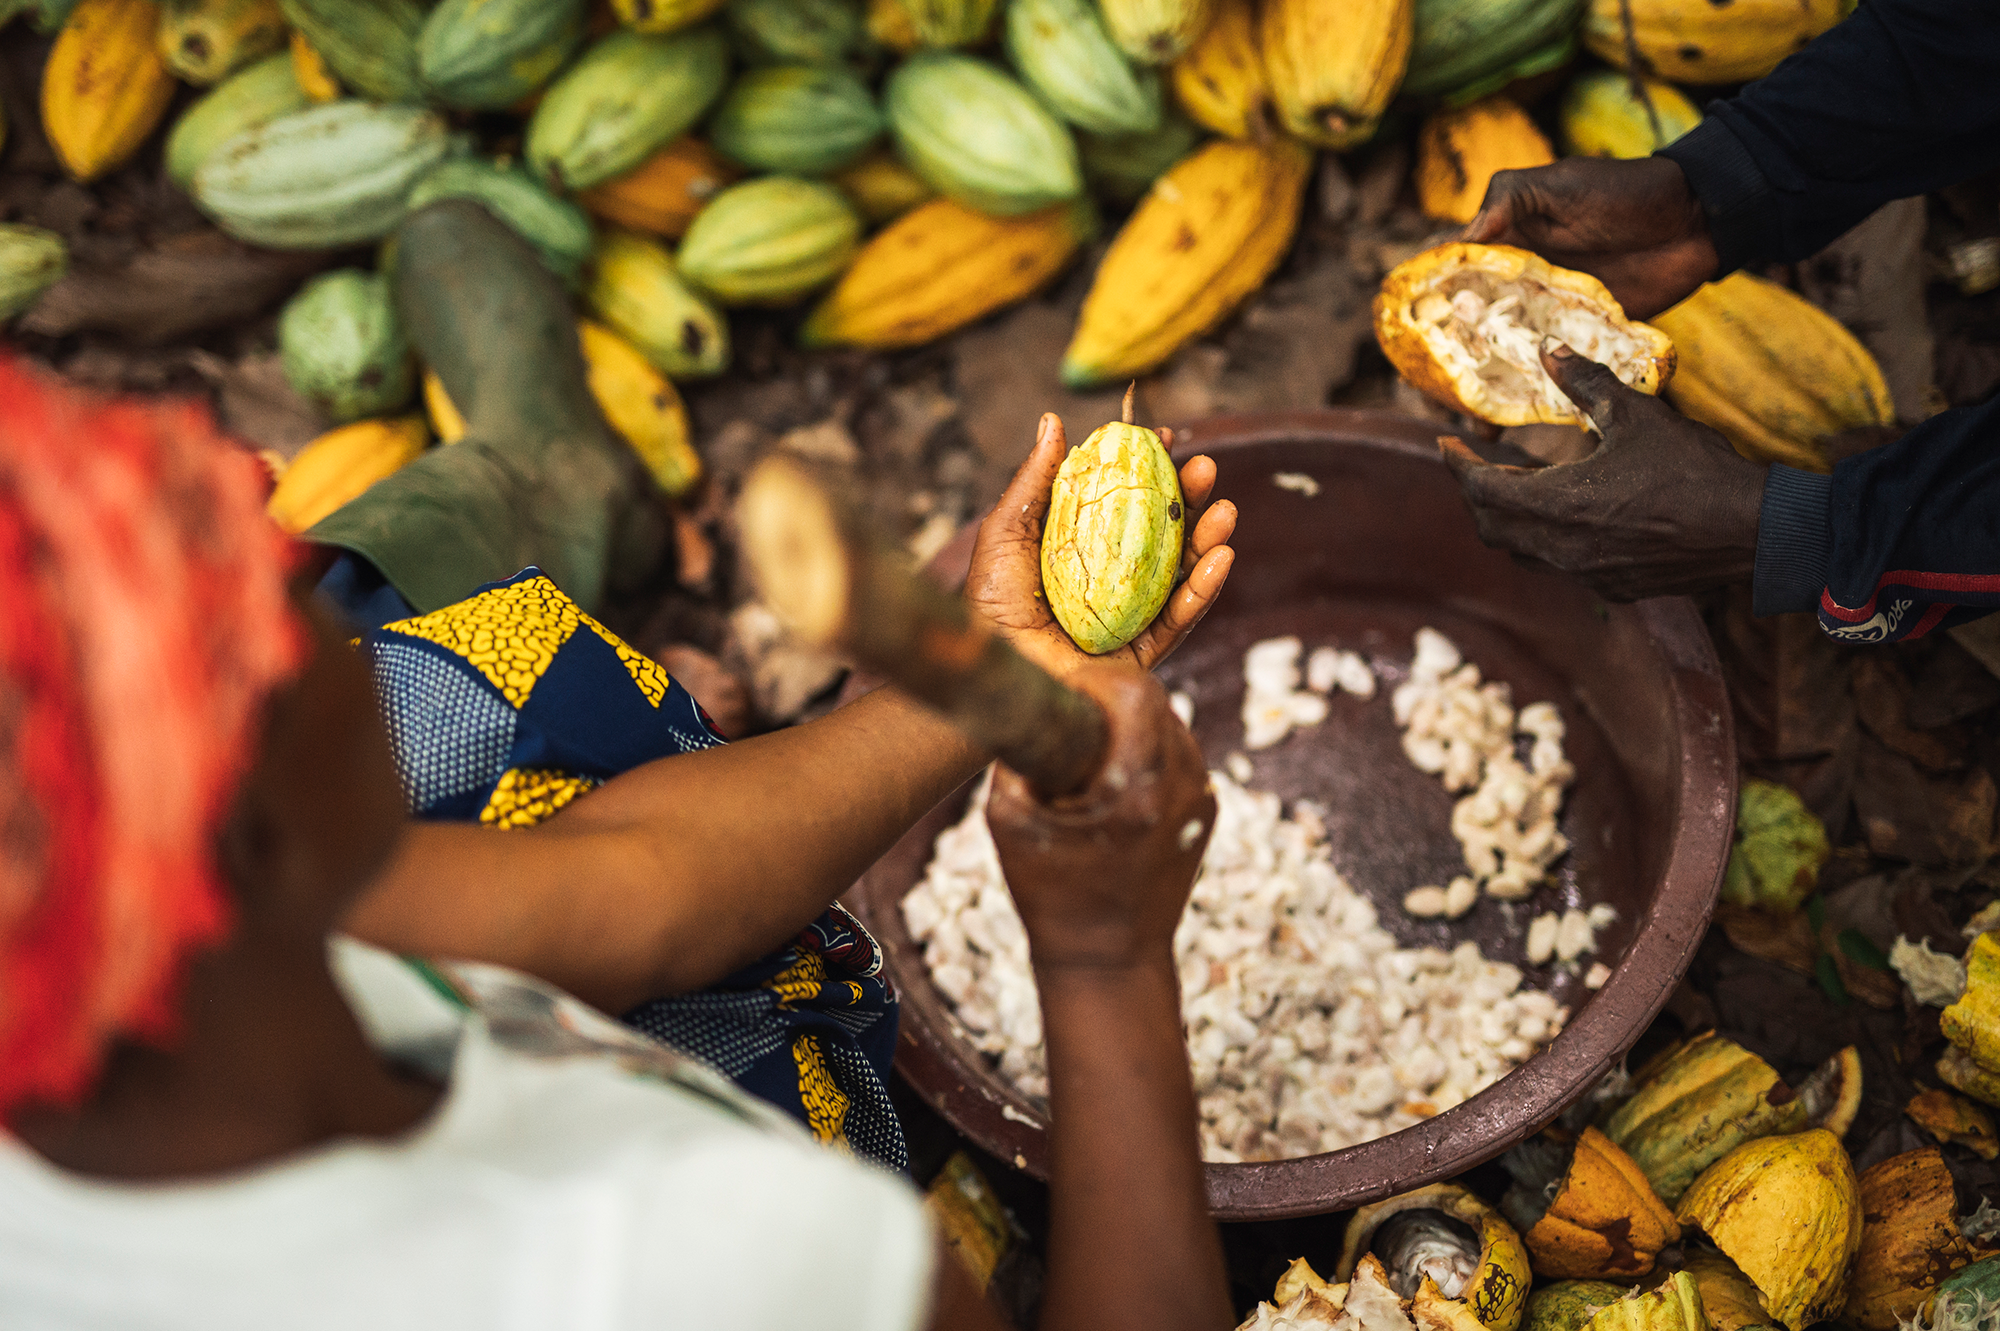 Two people cutting open cocoa beans